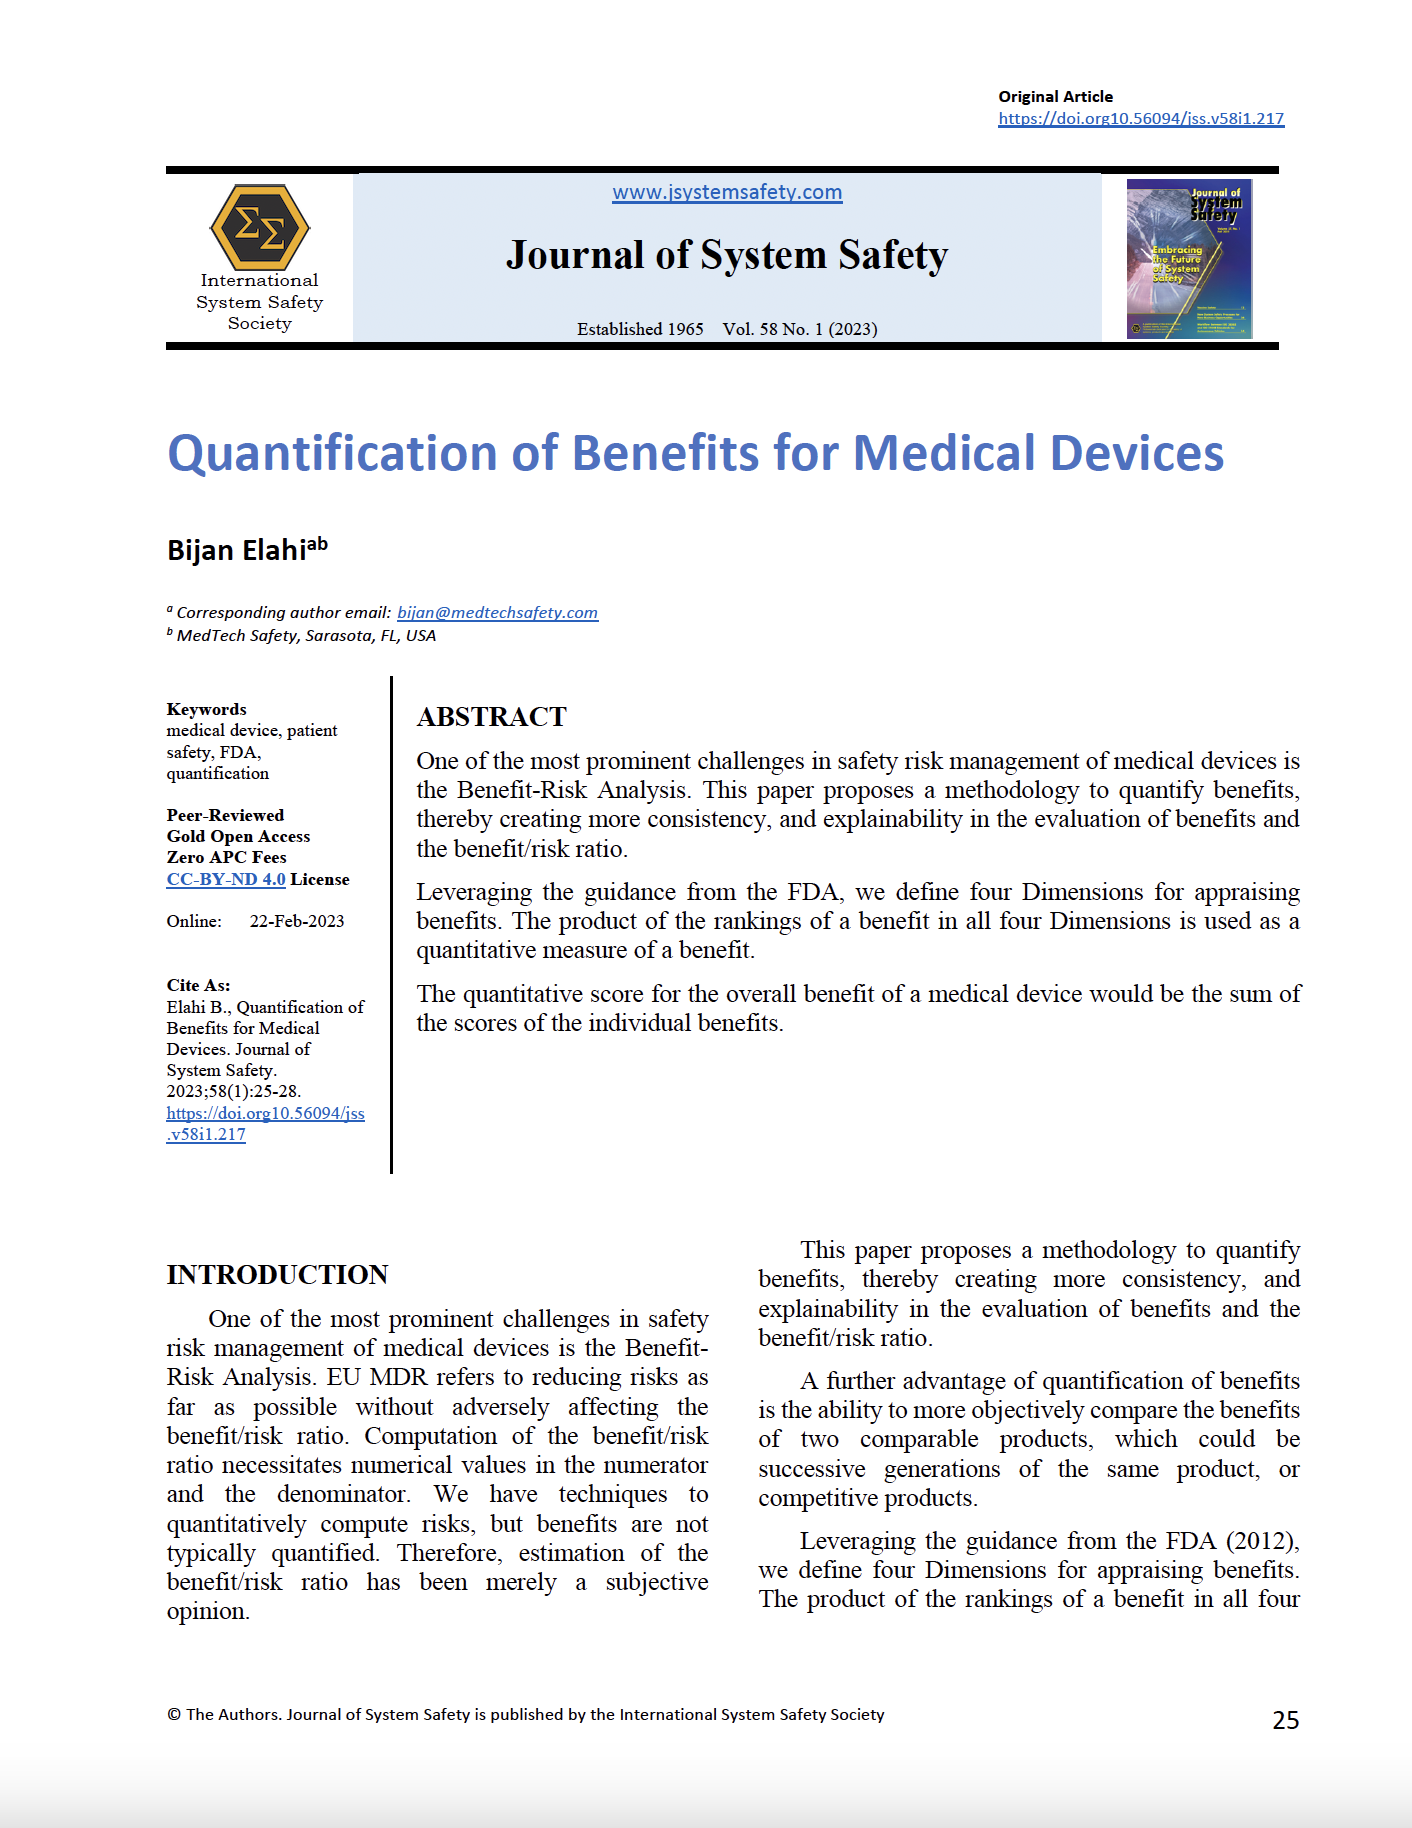 Quantification of Benefits for Medical Devices